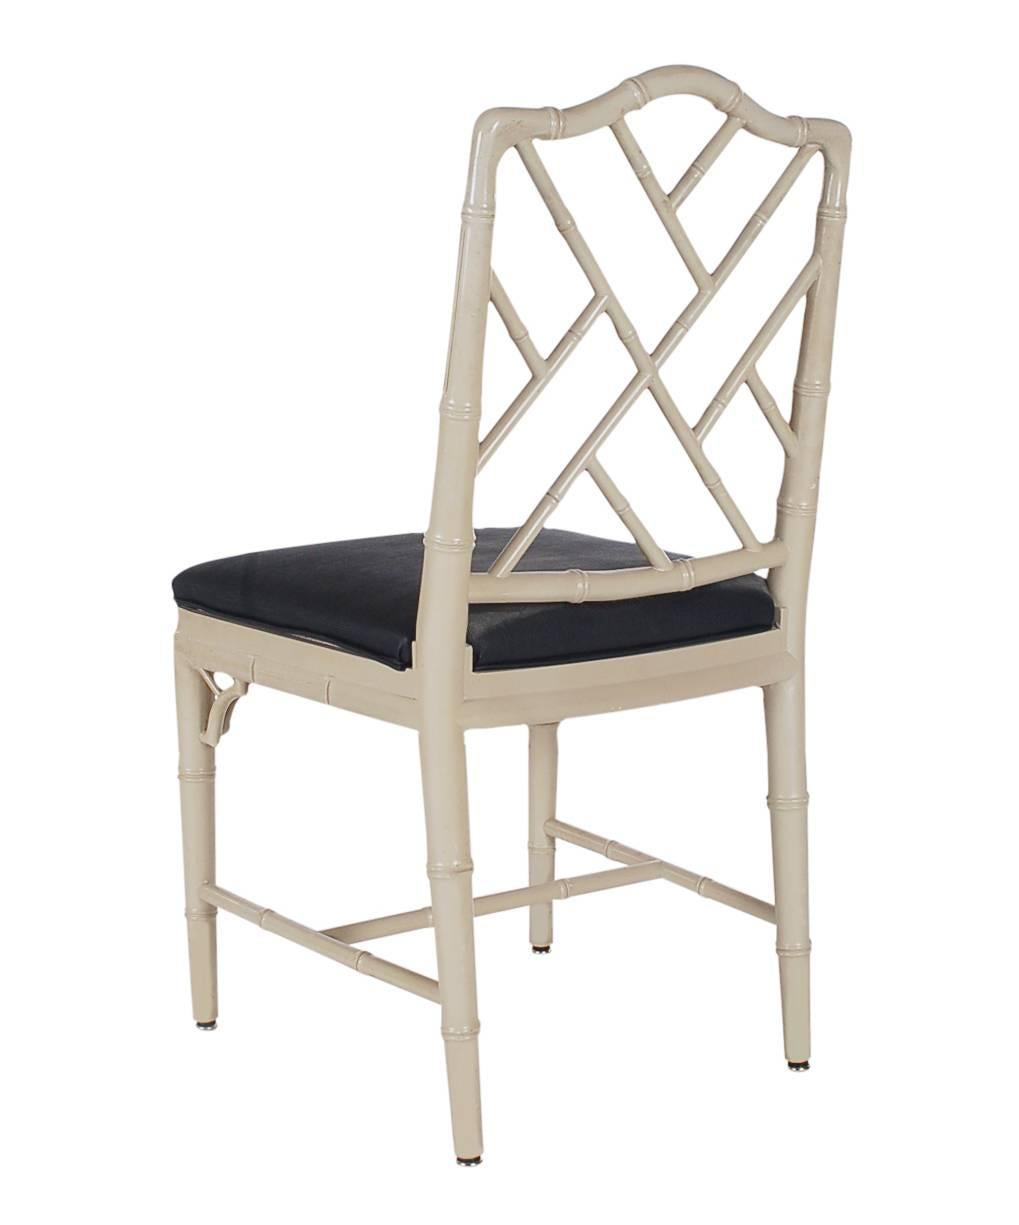 chippendale faux bamboo chairs